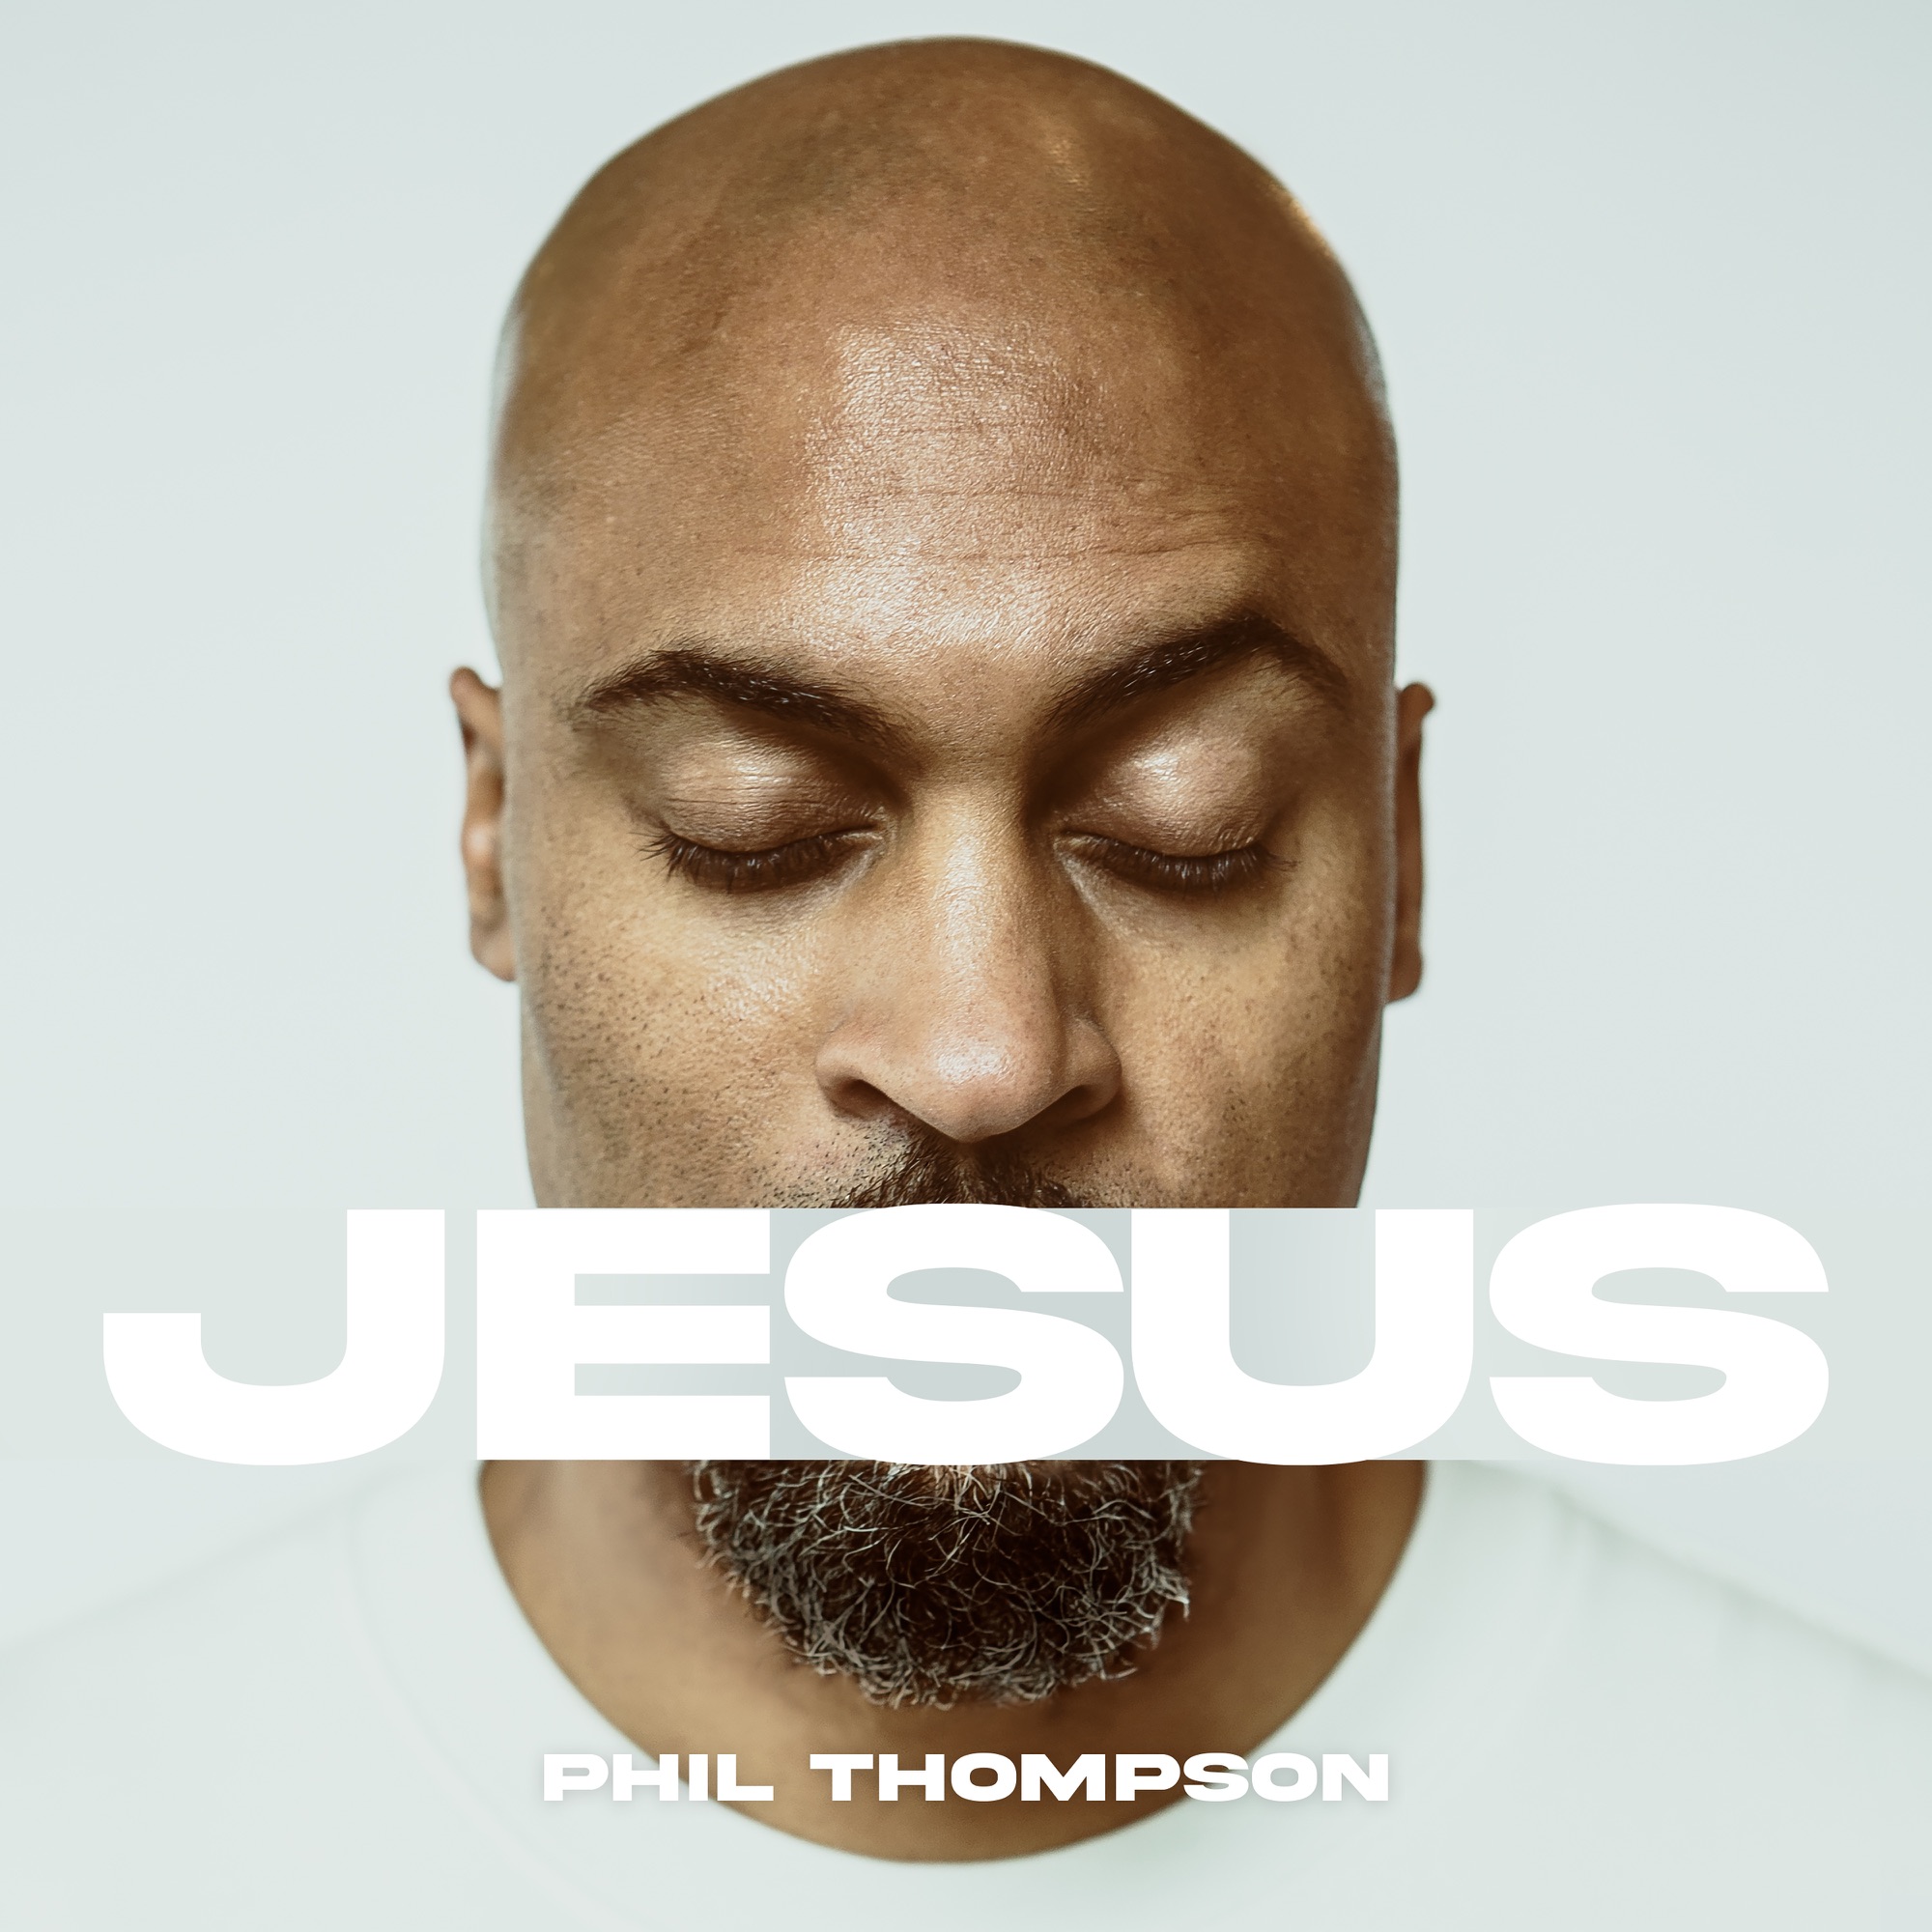 Art for Jesus by Phil Thompson